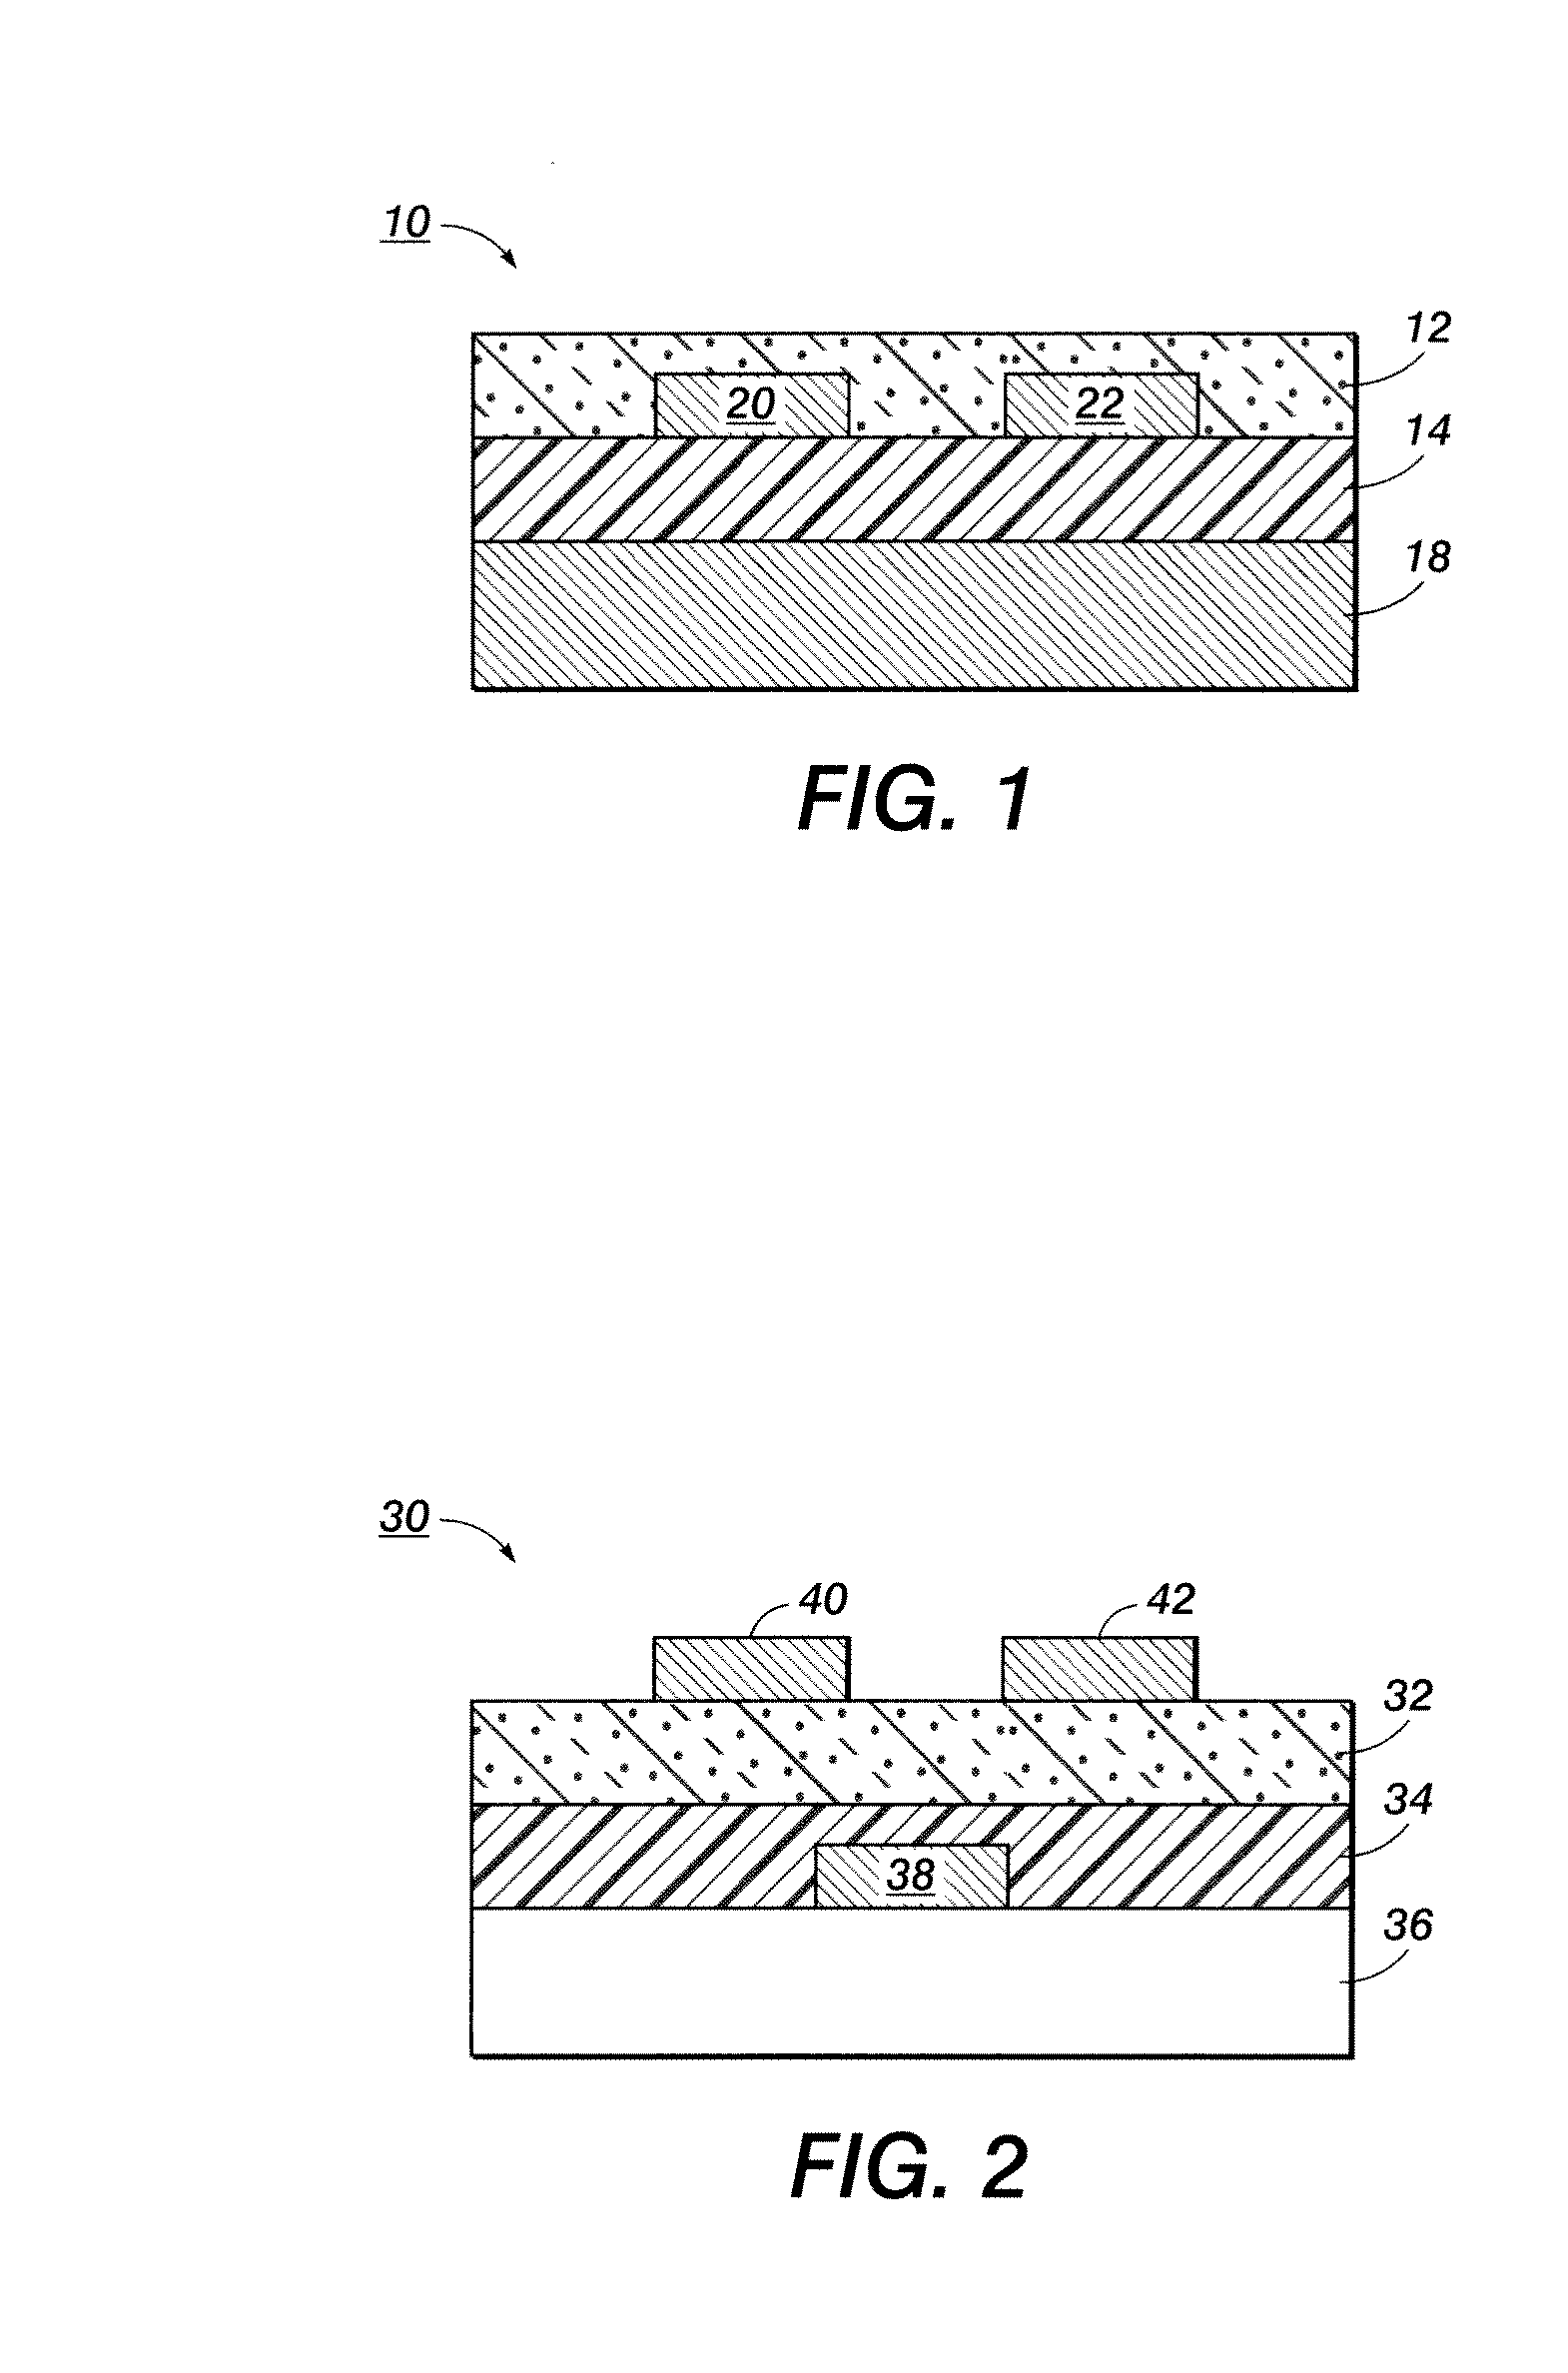 Carboxylic acid stabilized silver nanoparticles and process for producing same